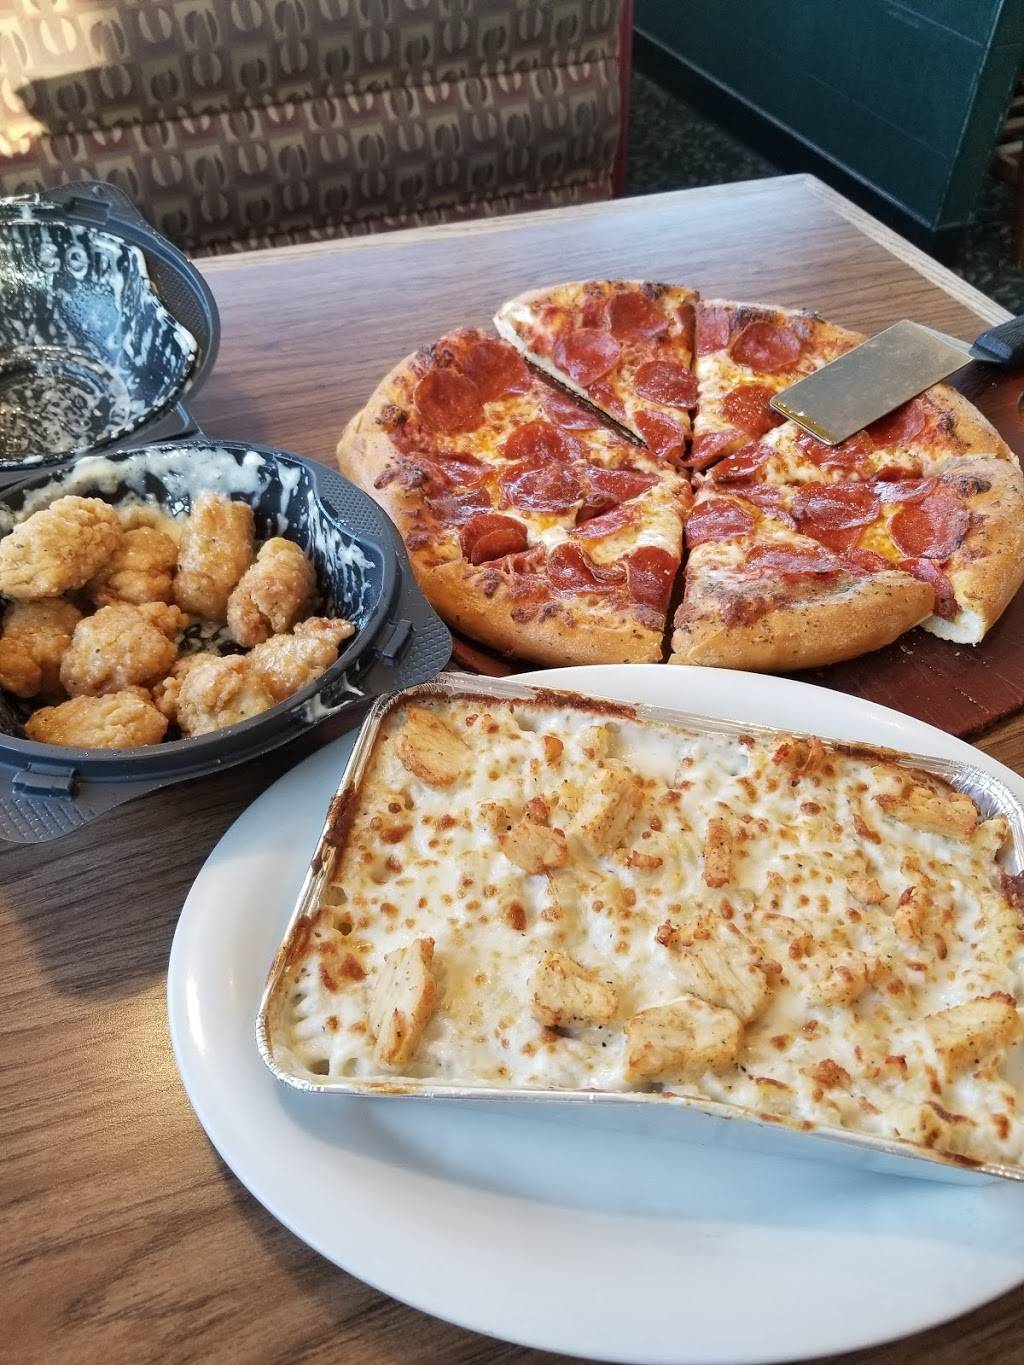 Pizza Hut | Pizza Hut, 124 N Chicago Ave #466, South Milwaukee, WI 53172 | Phone: (414) 764-2330